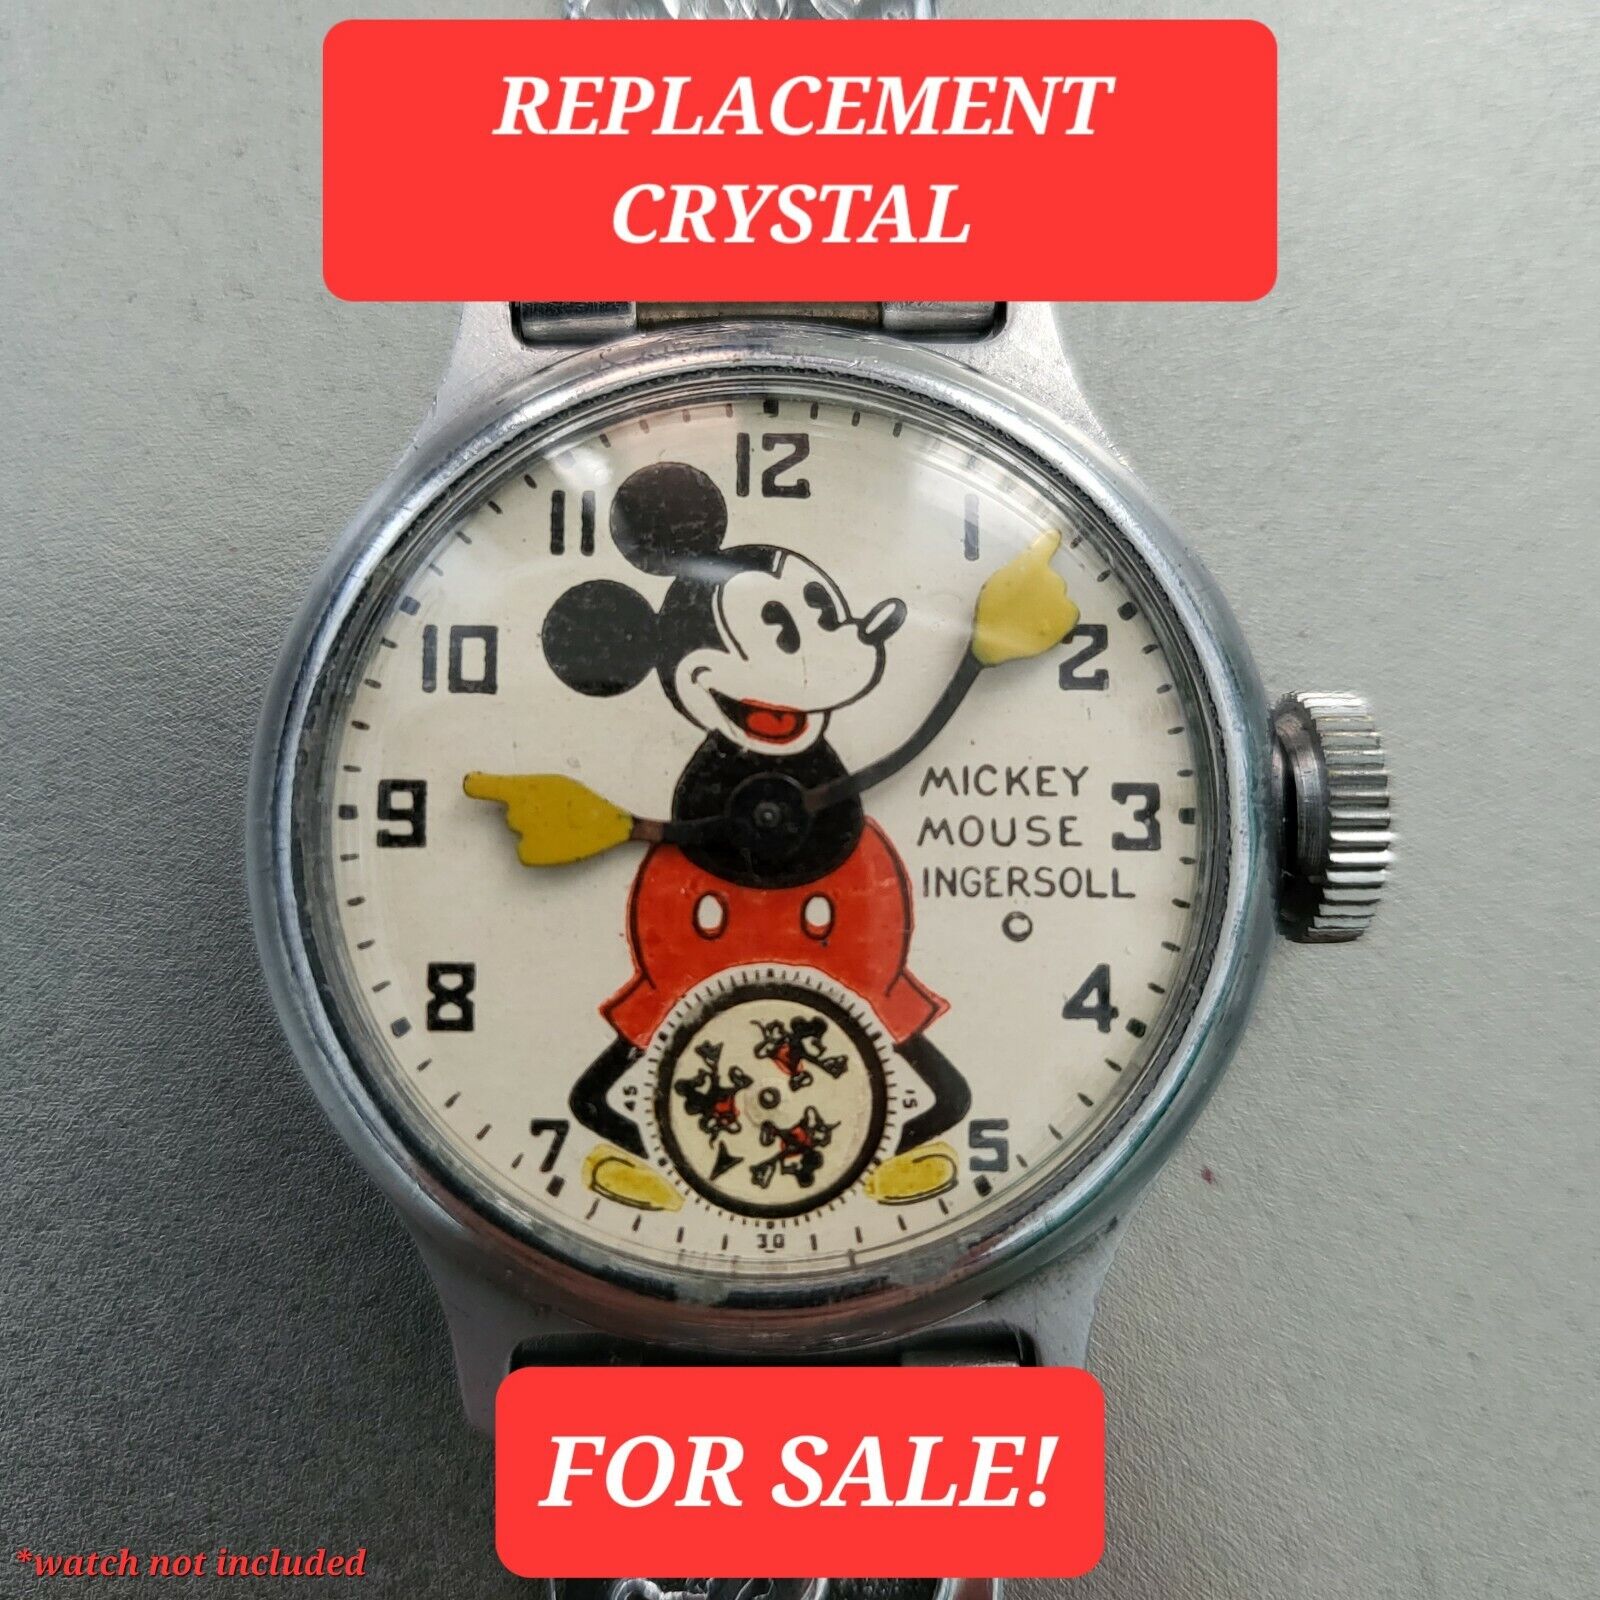 REPLACEMENT CRYSTAL for Ingersoll mickey mouse 1930s disney vintage watch 